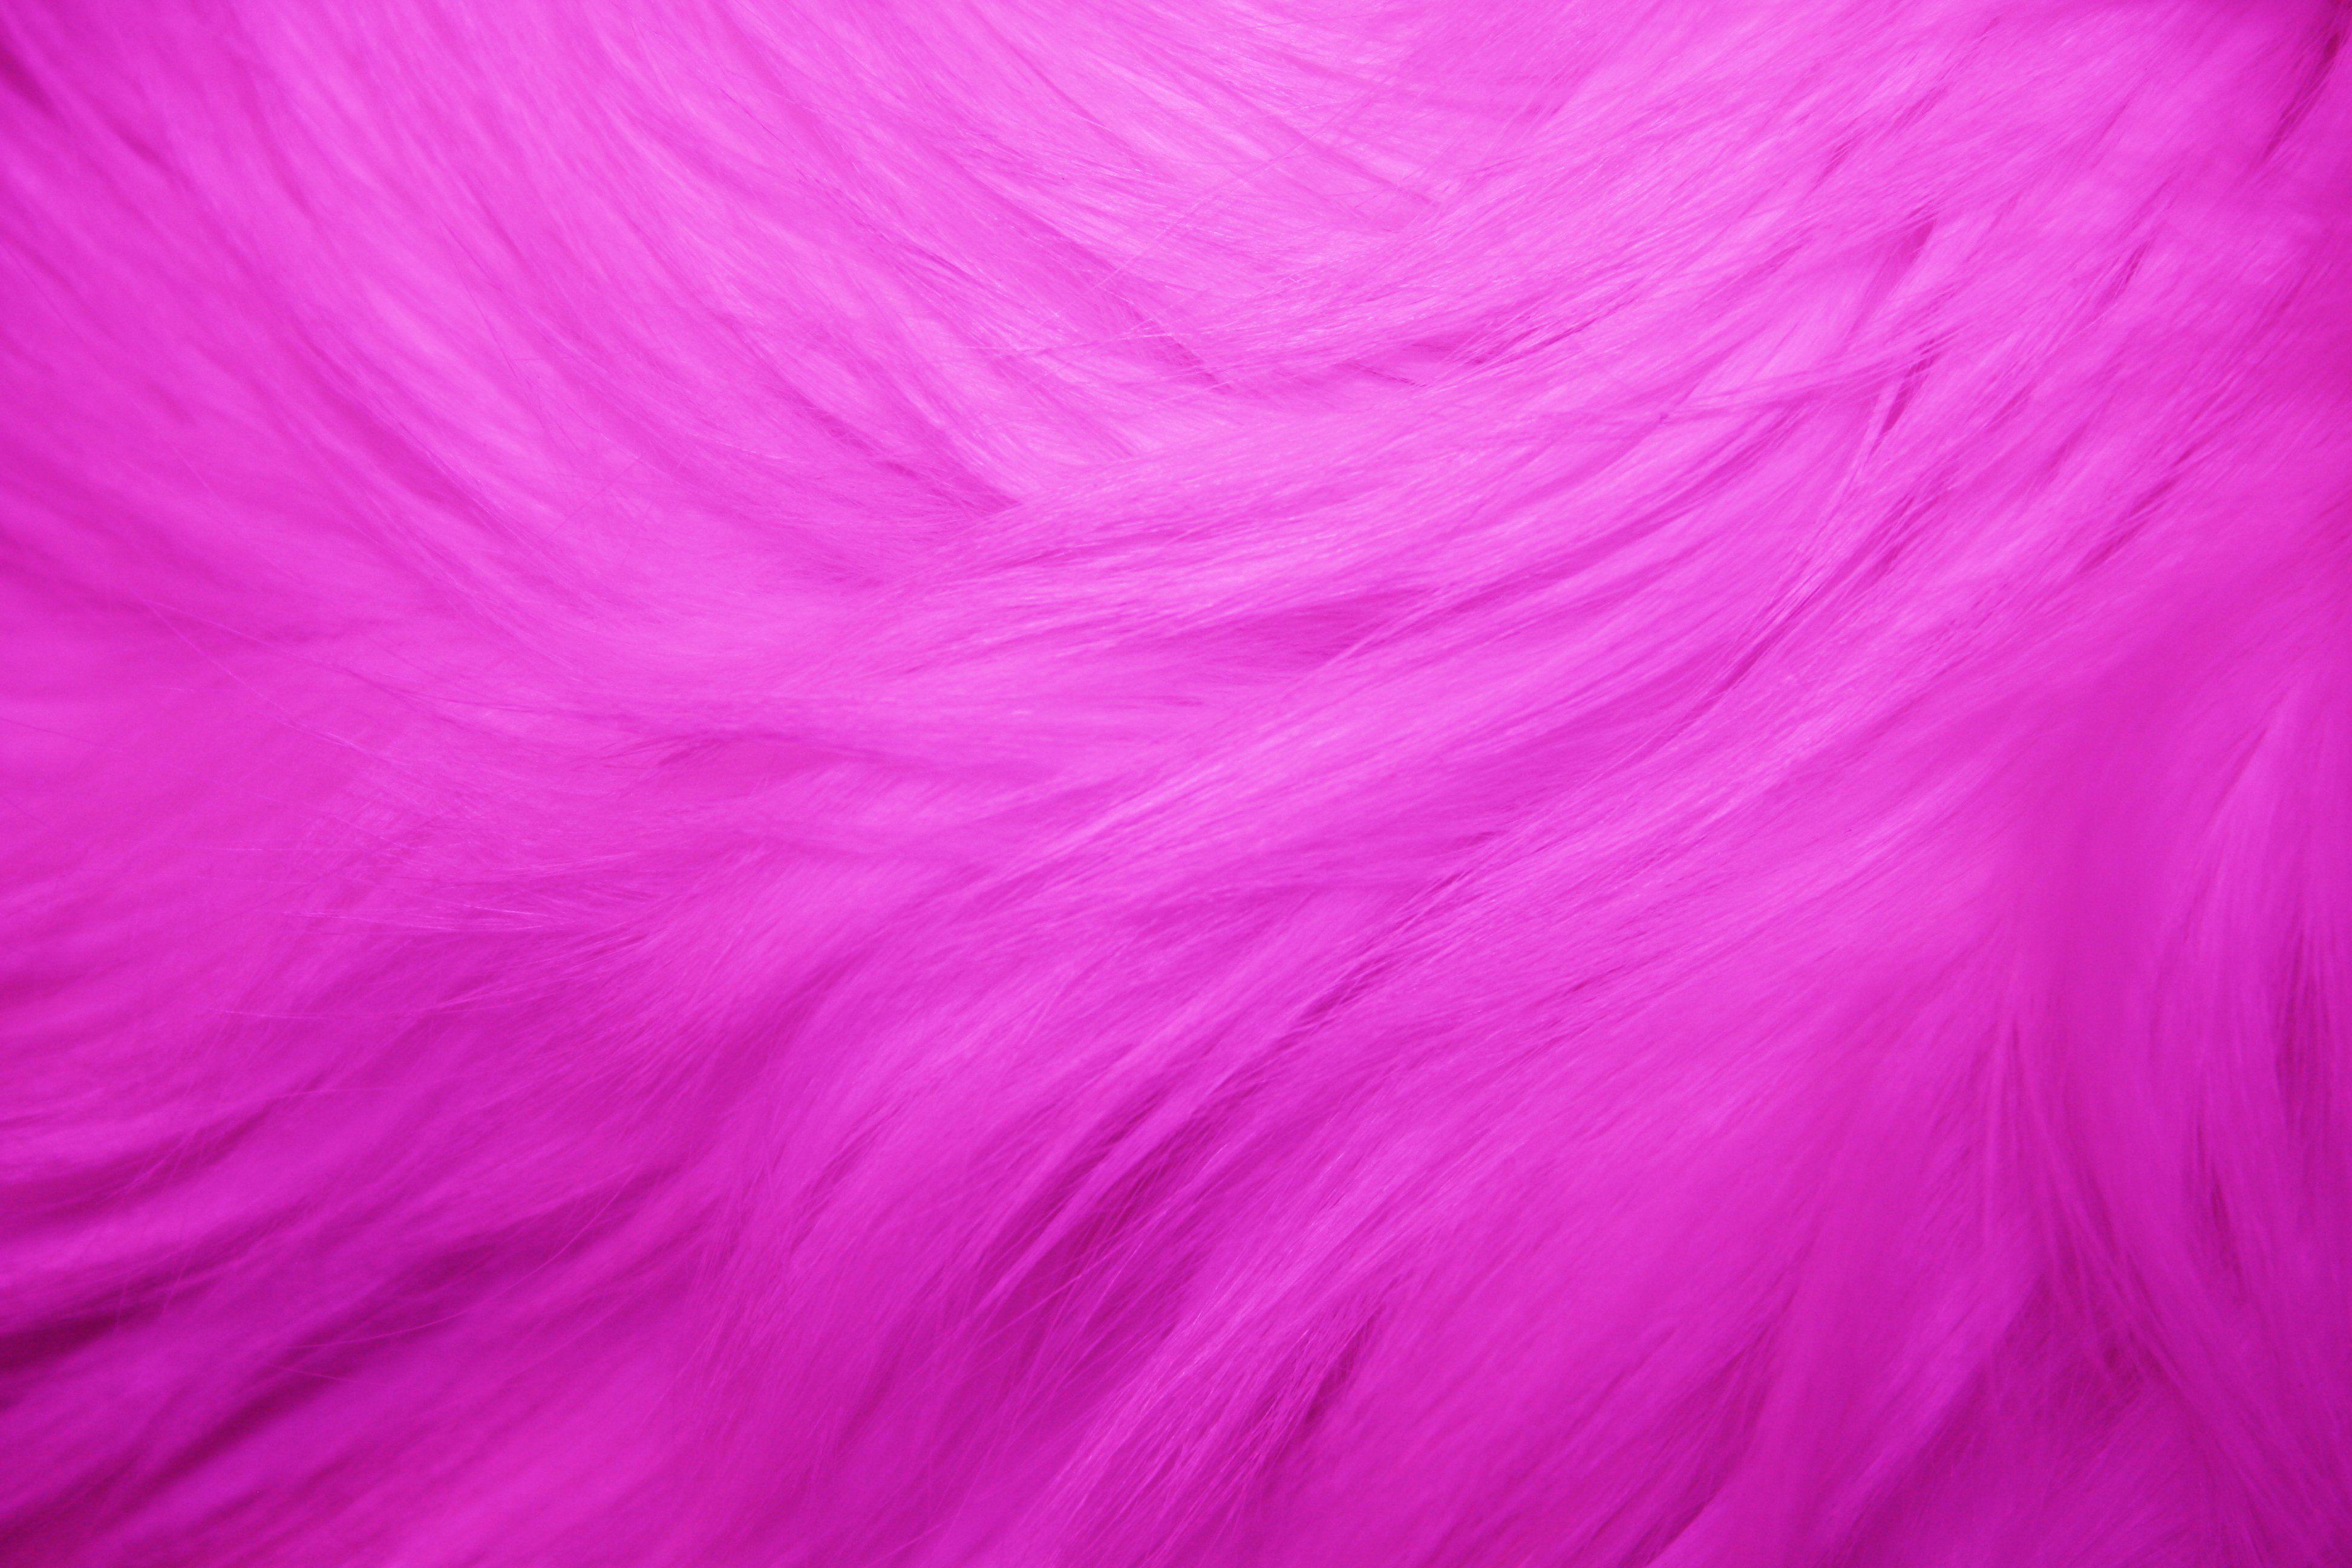 hot pink and black wallpaper - Image And Wallpaper free